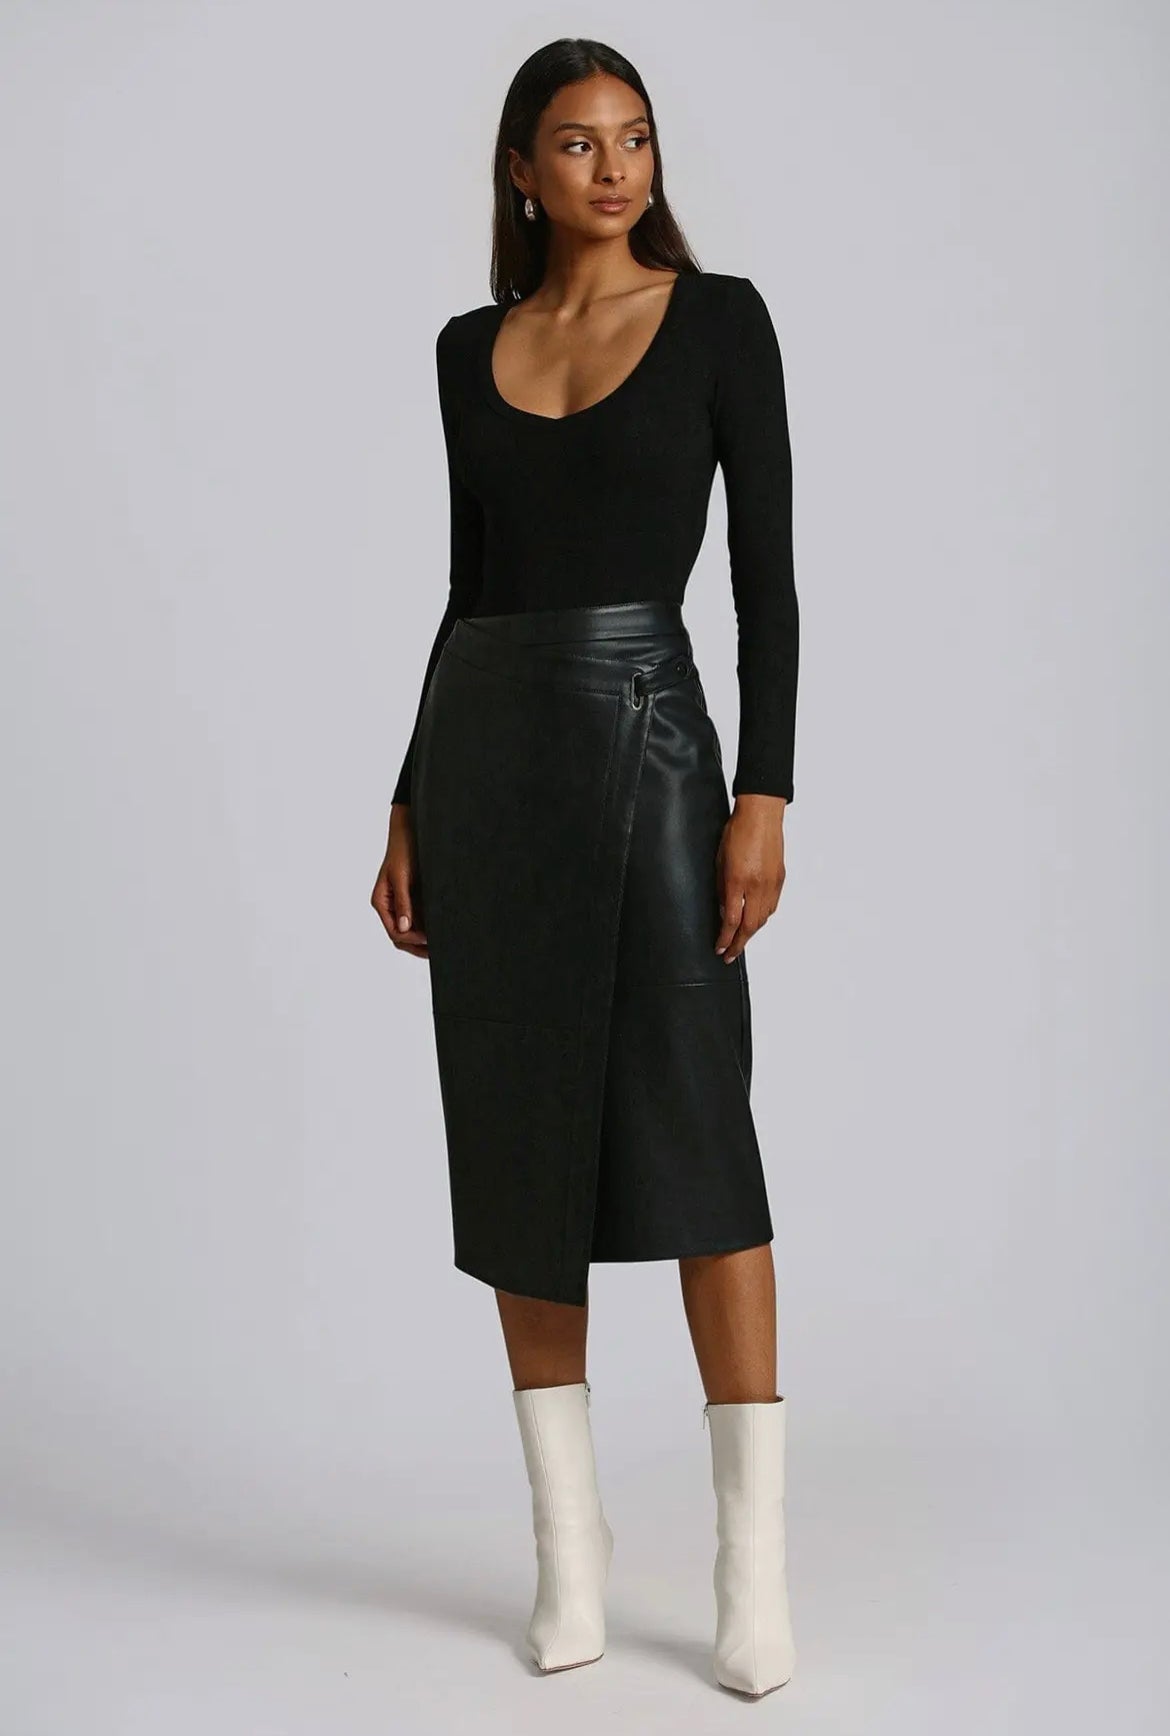 Faux-Ever Leather Wrap
Pencil Skirt